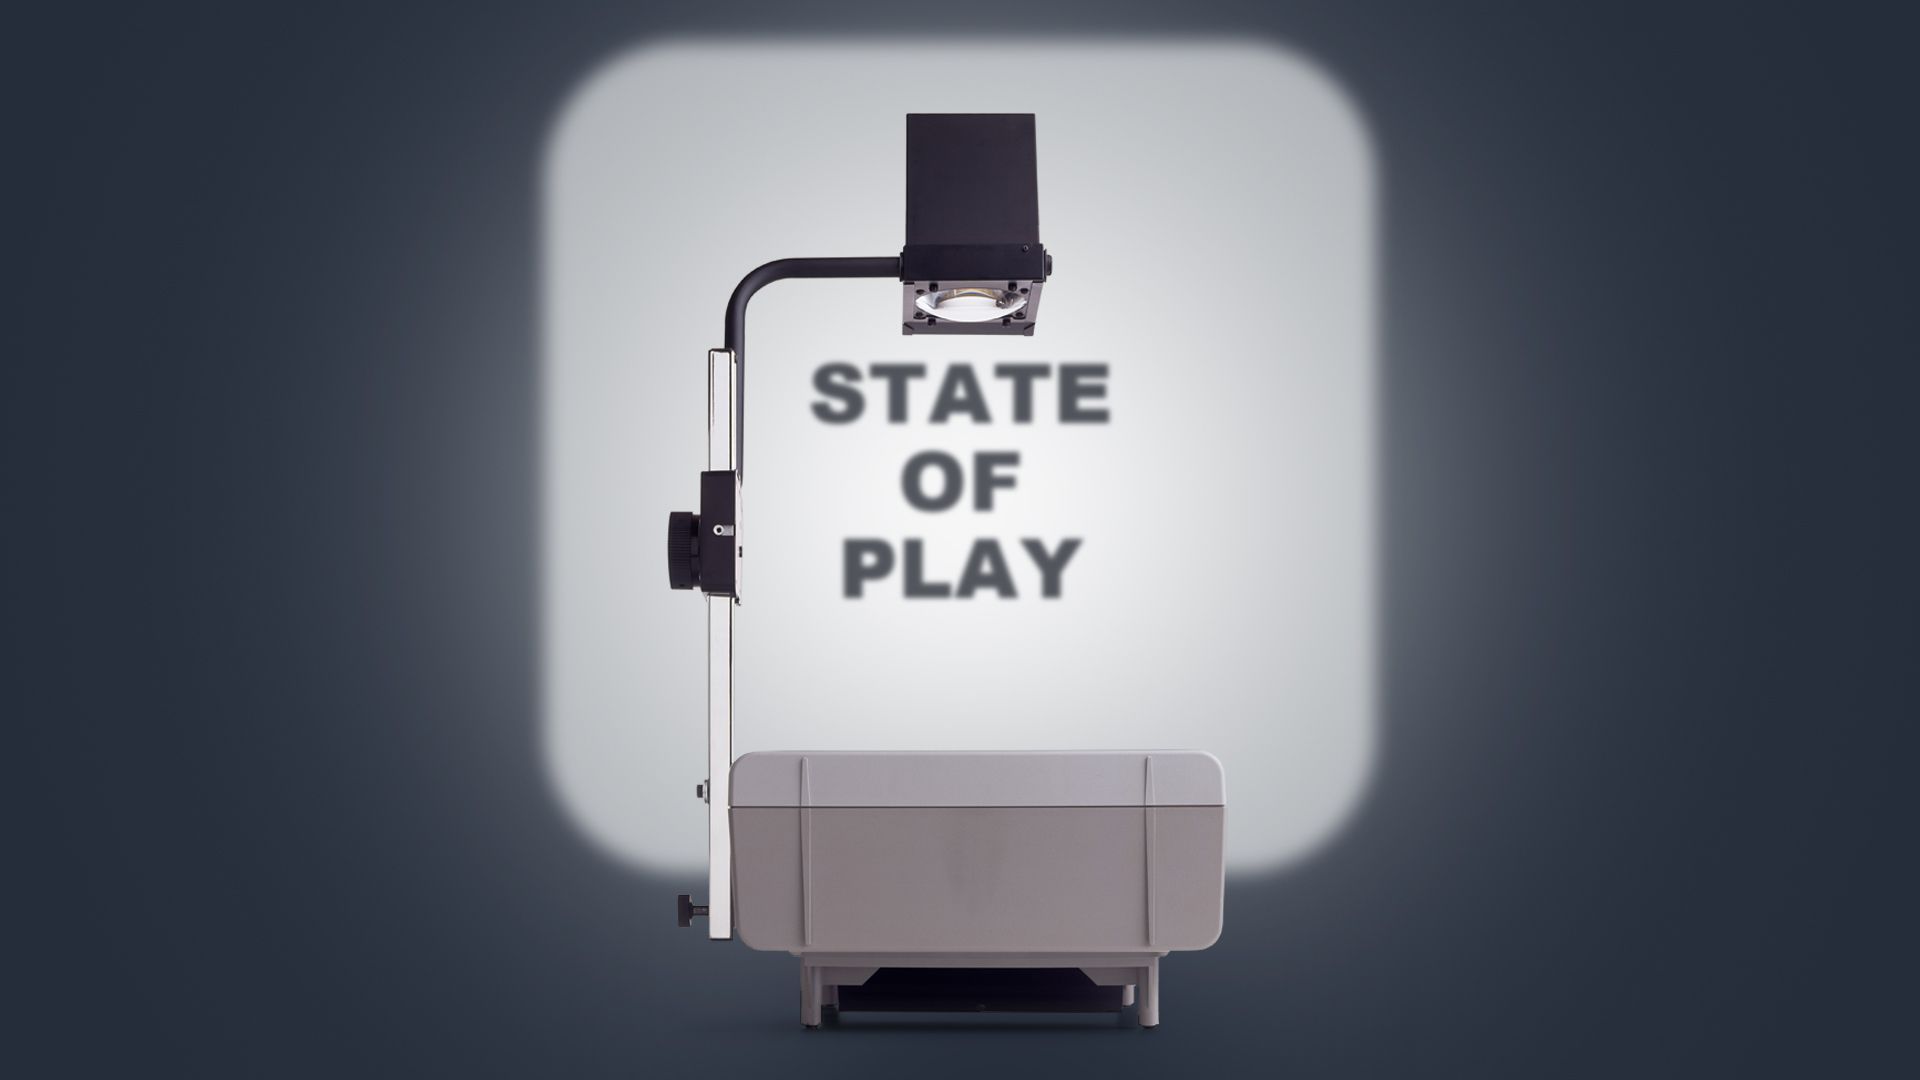 Illustration of an overhead projector illuminating a square that says State of Play